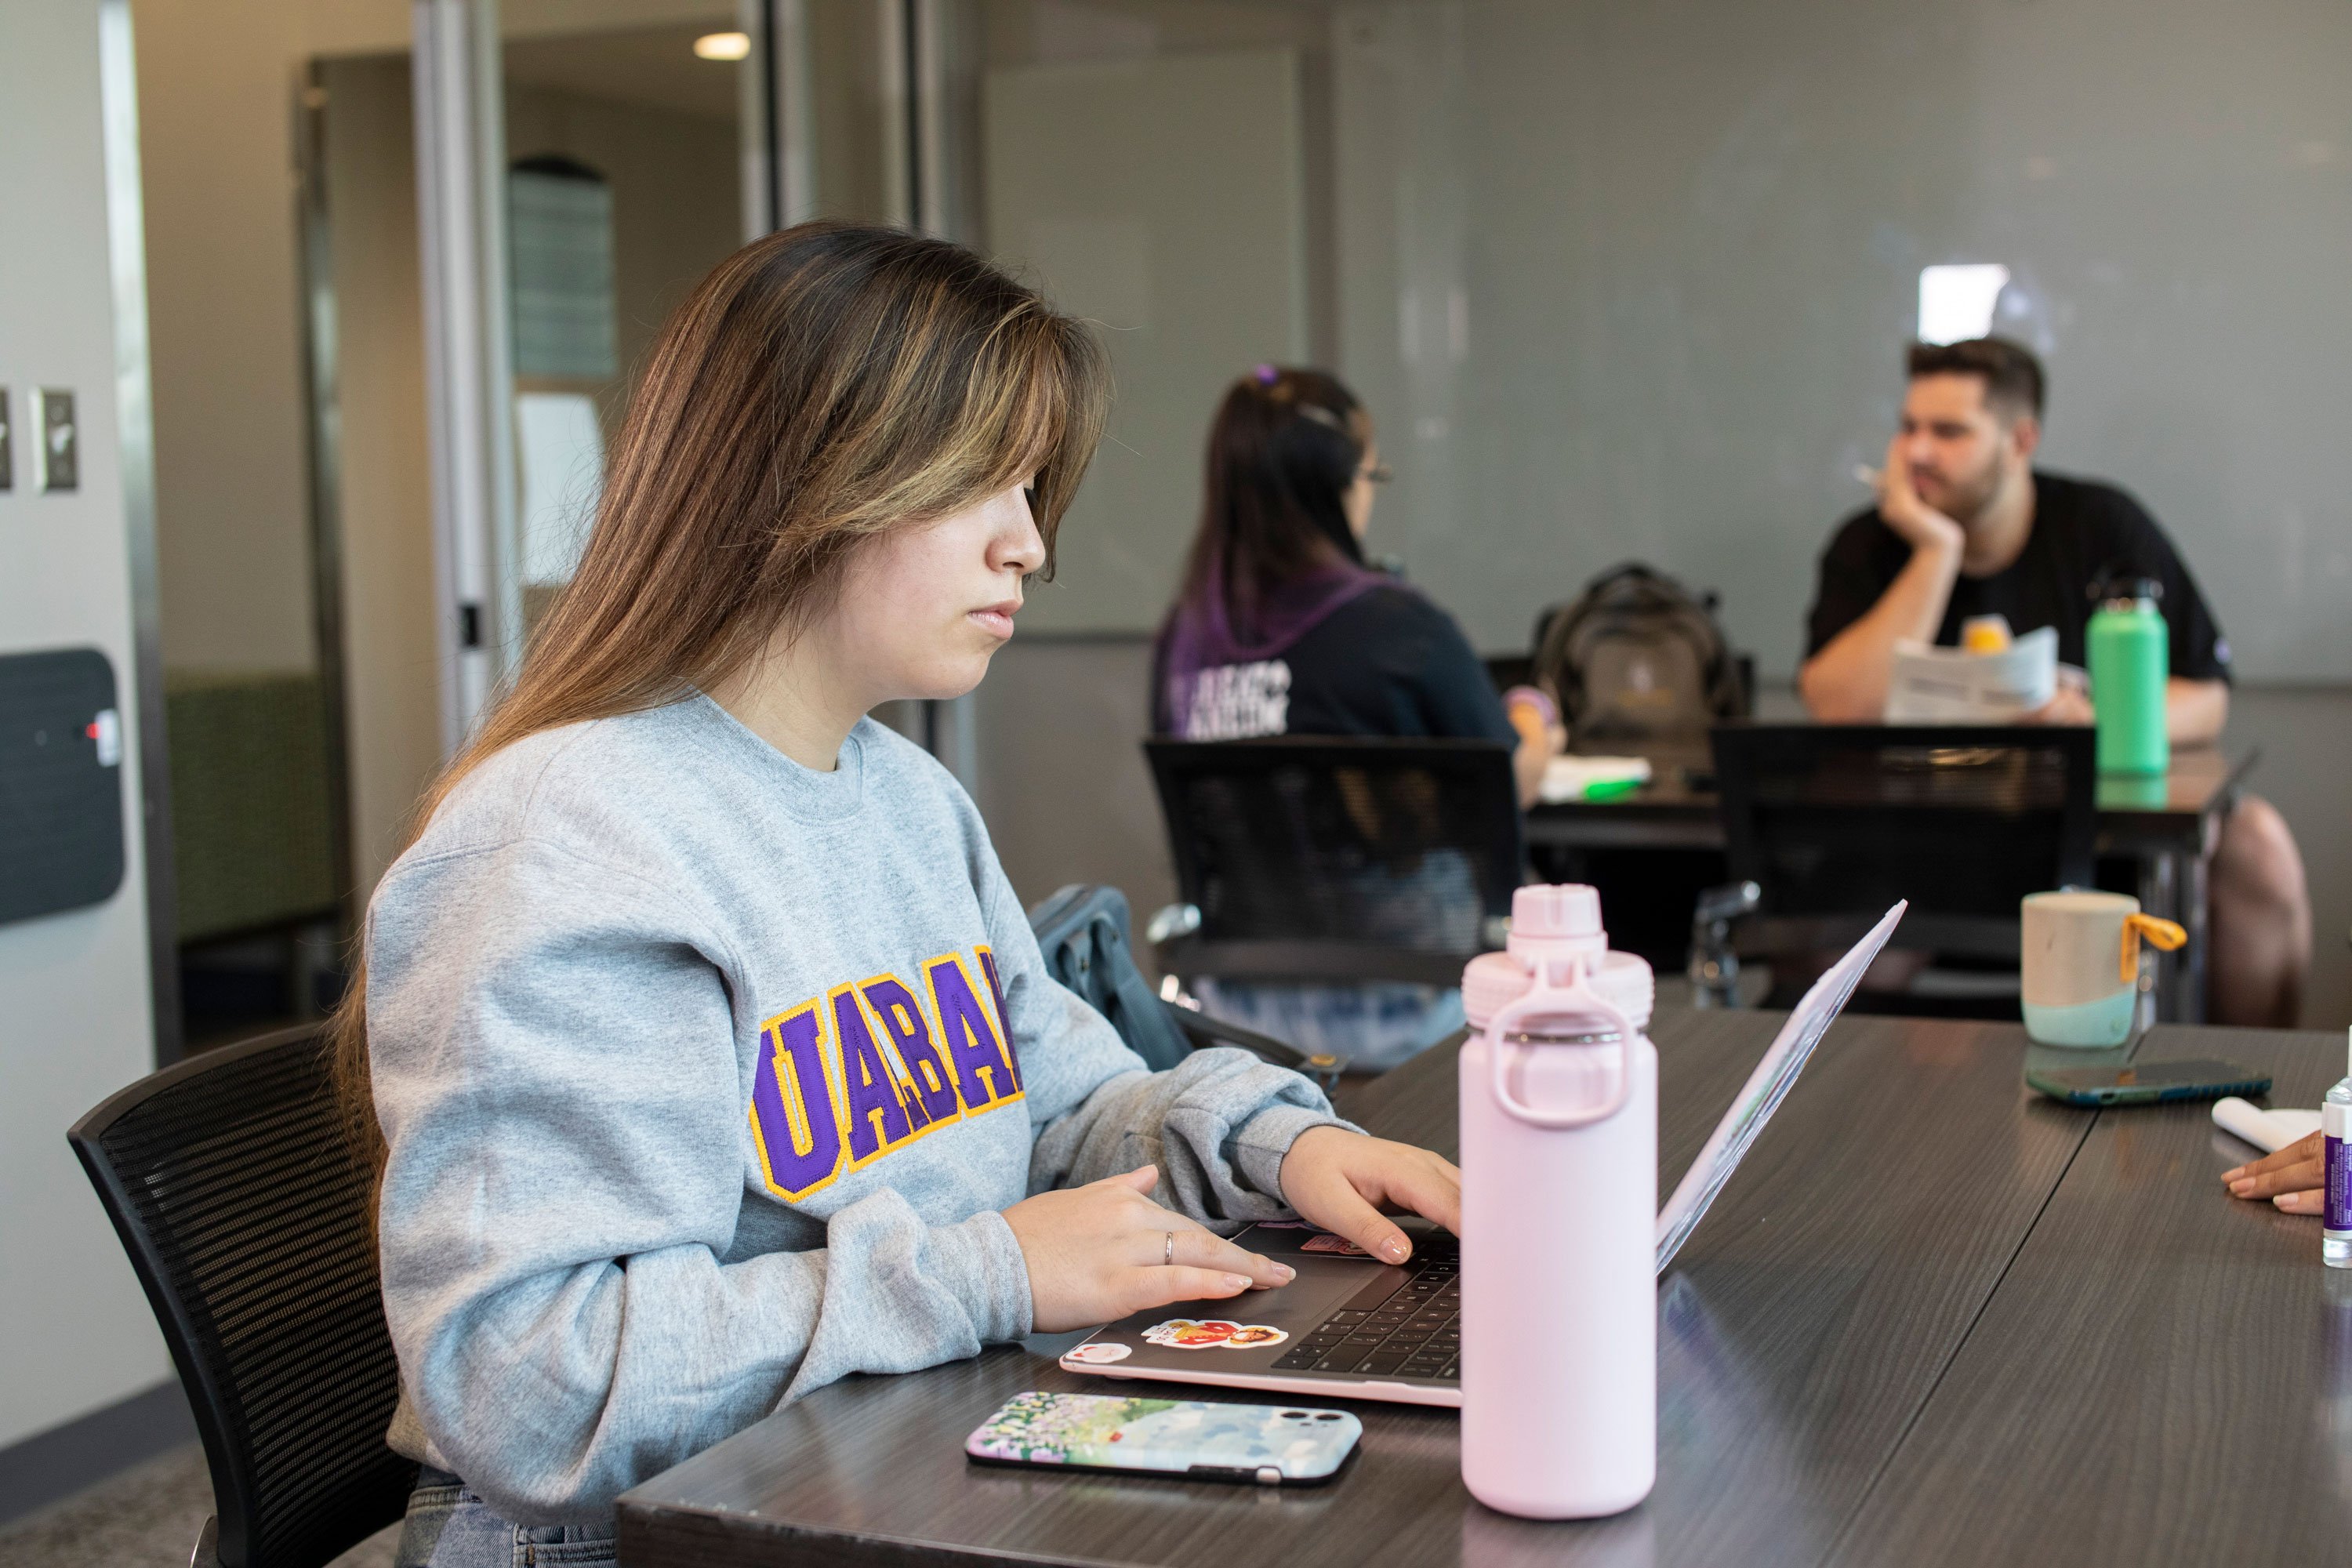 A student works on her laptop, with a phone and water bottle close by, while two other students talk in the background, inside a study room